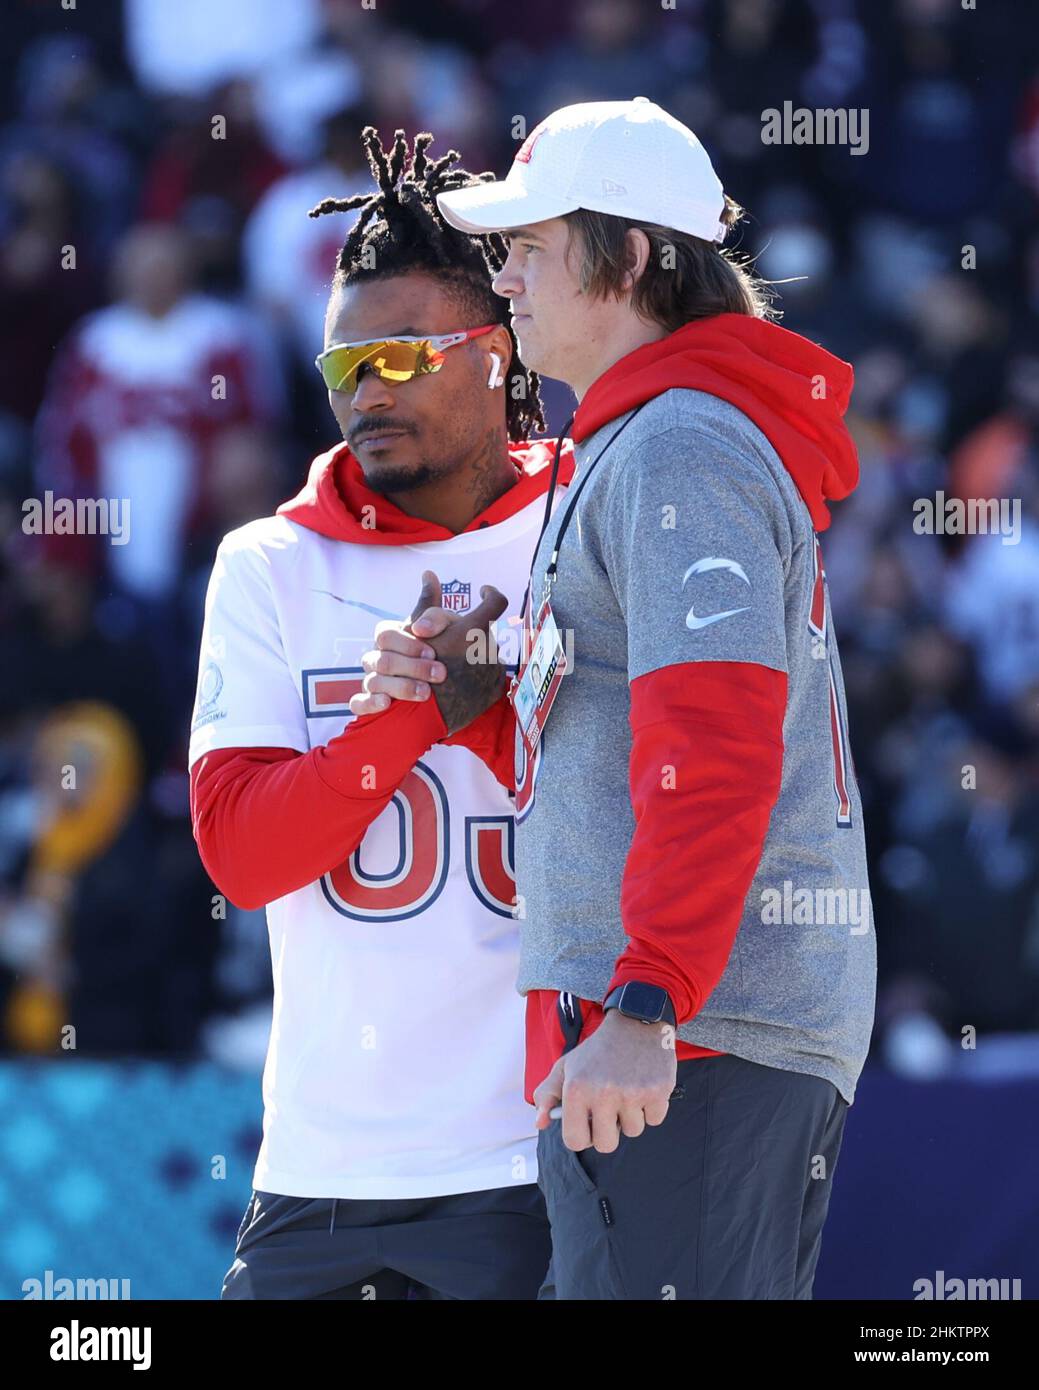 Las Vegas, Nevada, USA. 5th Feb, 2022. Los Angeles Chargers quarterback Justin Herbert (10) and Los Angeles Chargers safety Derwin James (33) shaking hands during the AFC Pro Bowl Practice at Las Vegas Ballpark in Las Vegas, Nevada. Darren Lee/CSM/Alamy Live News Stock Photo